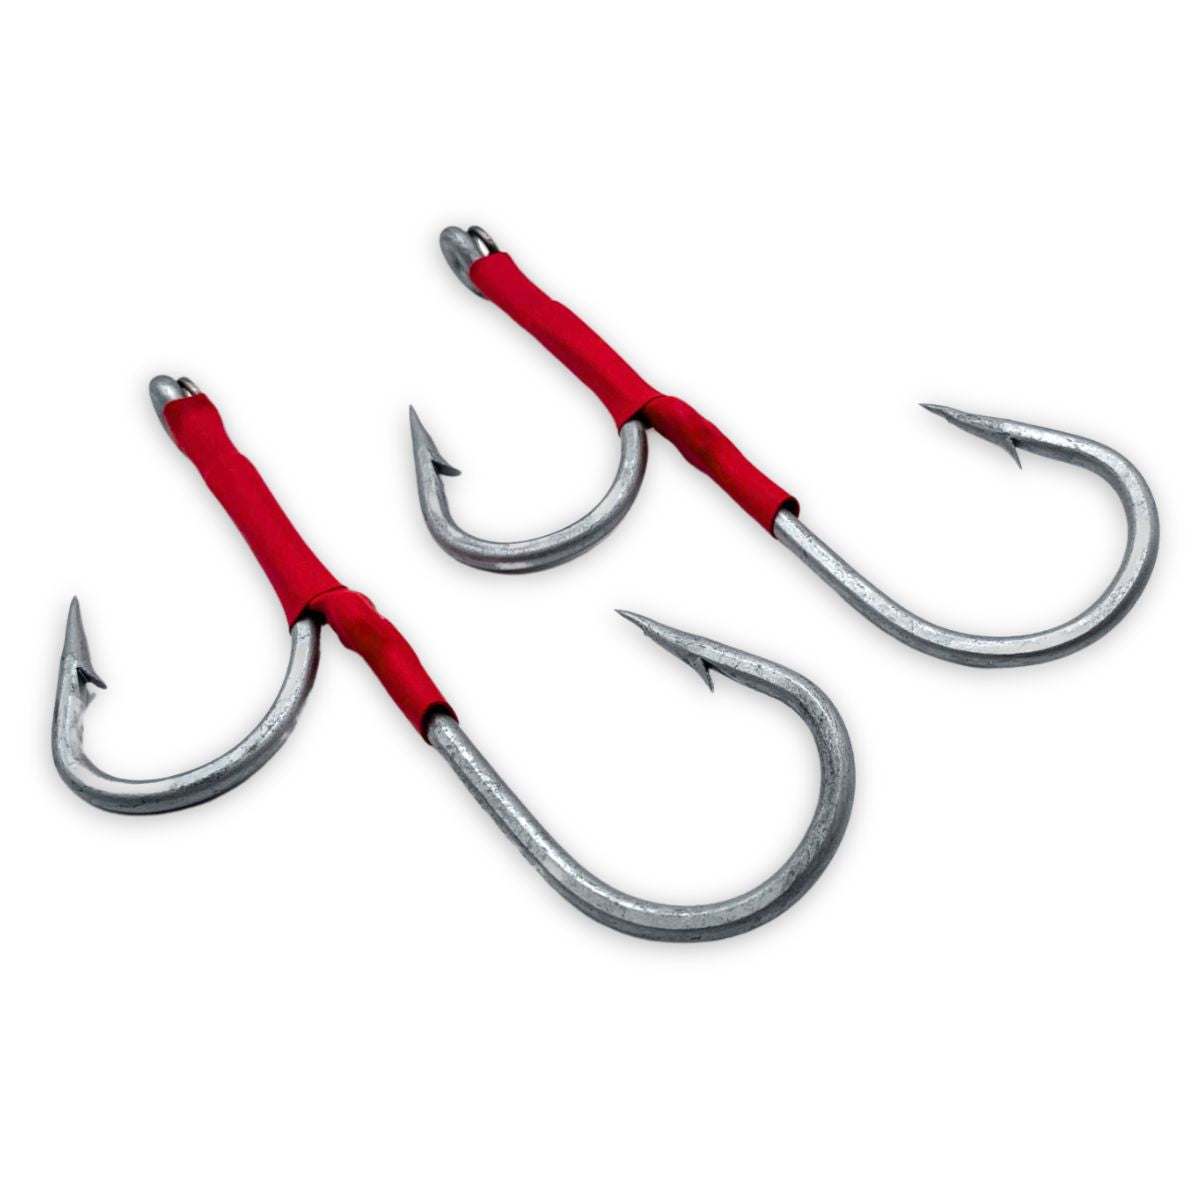 Kamikaze - Twin Pack, Double Assist Hook Rigs, 400lb wire : Size 10/0